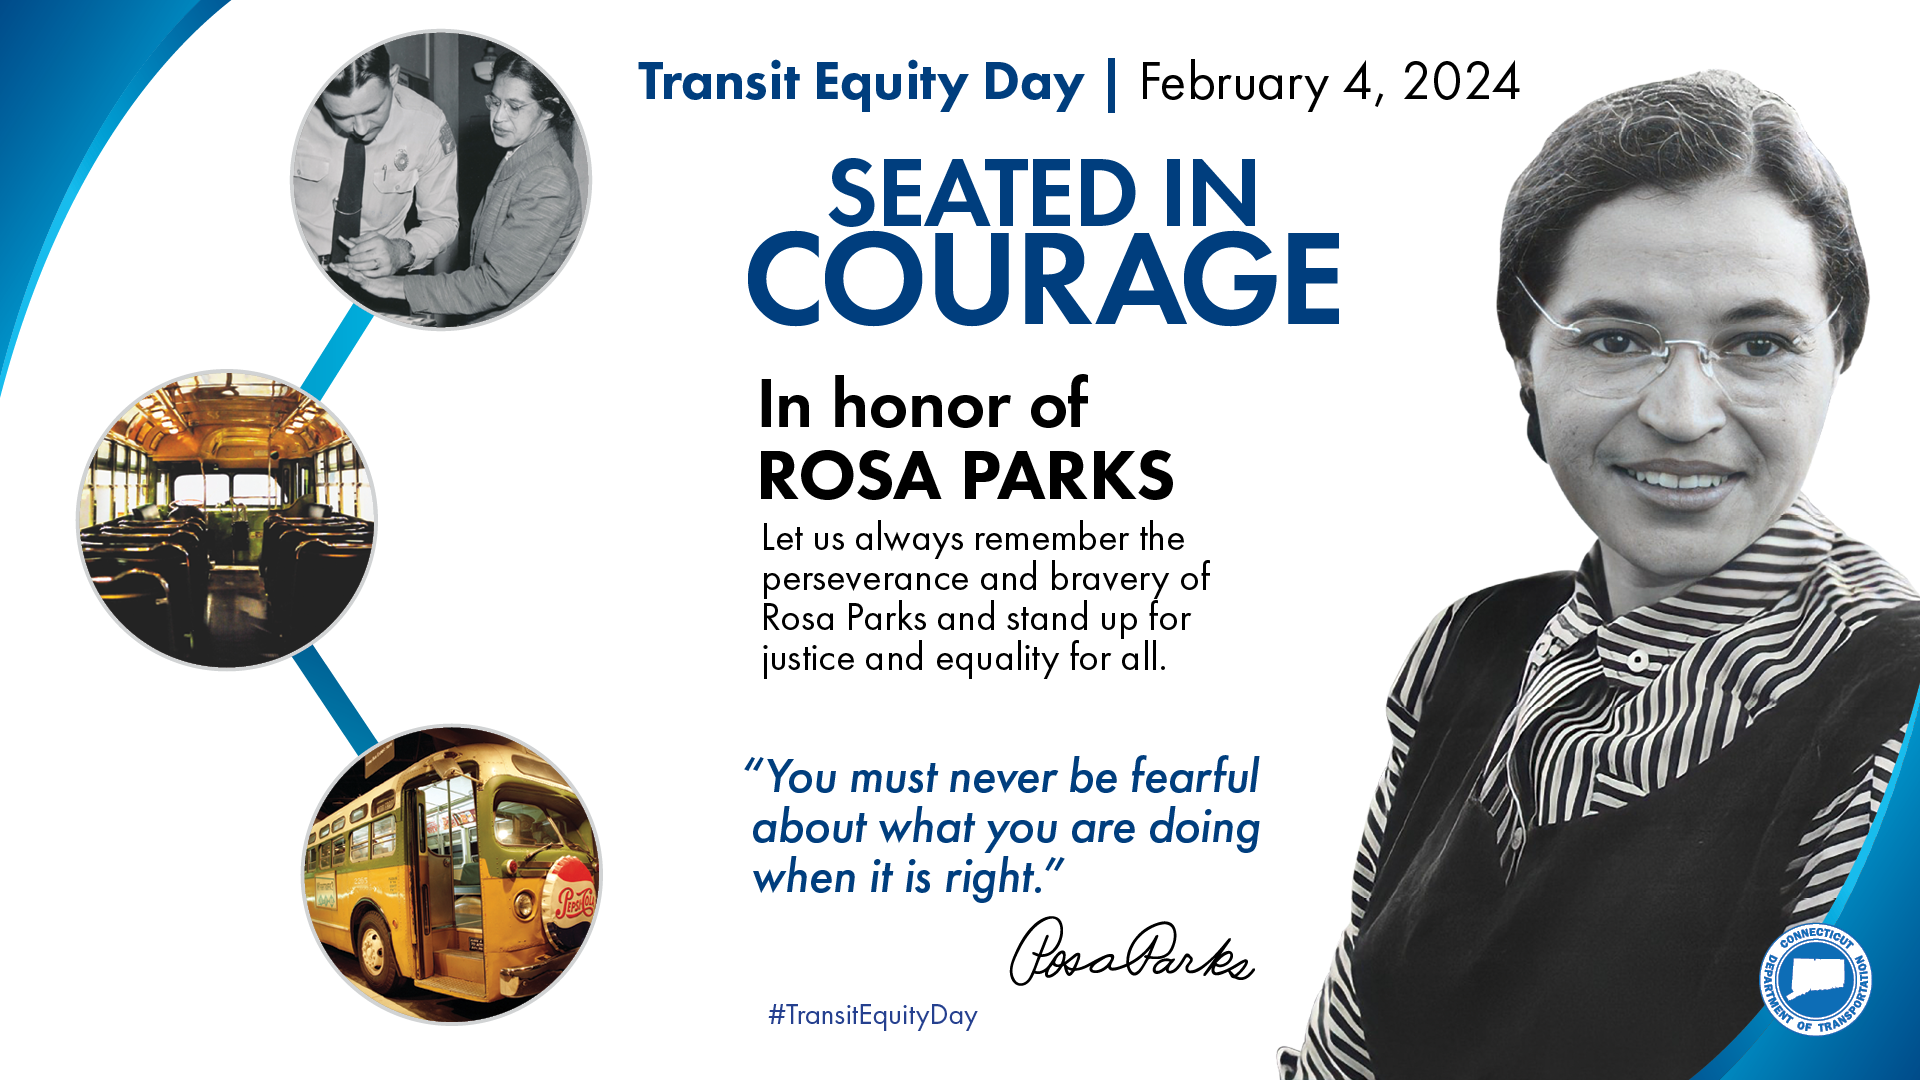 Transit Equity Day, February 4, 2024. Seated in Courage, in honor of Rosa Parks